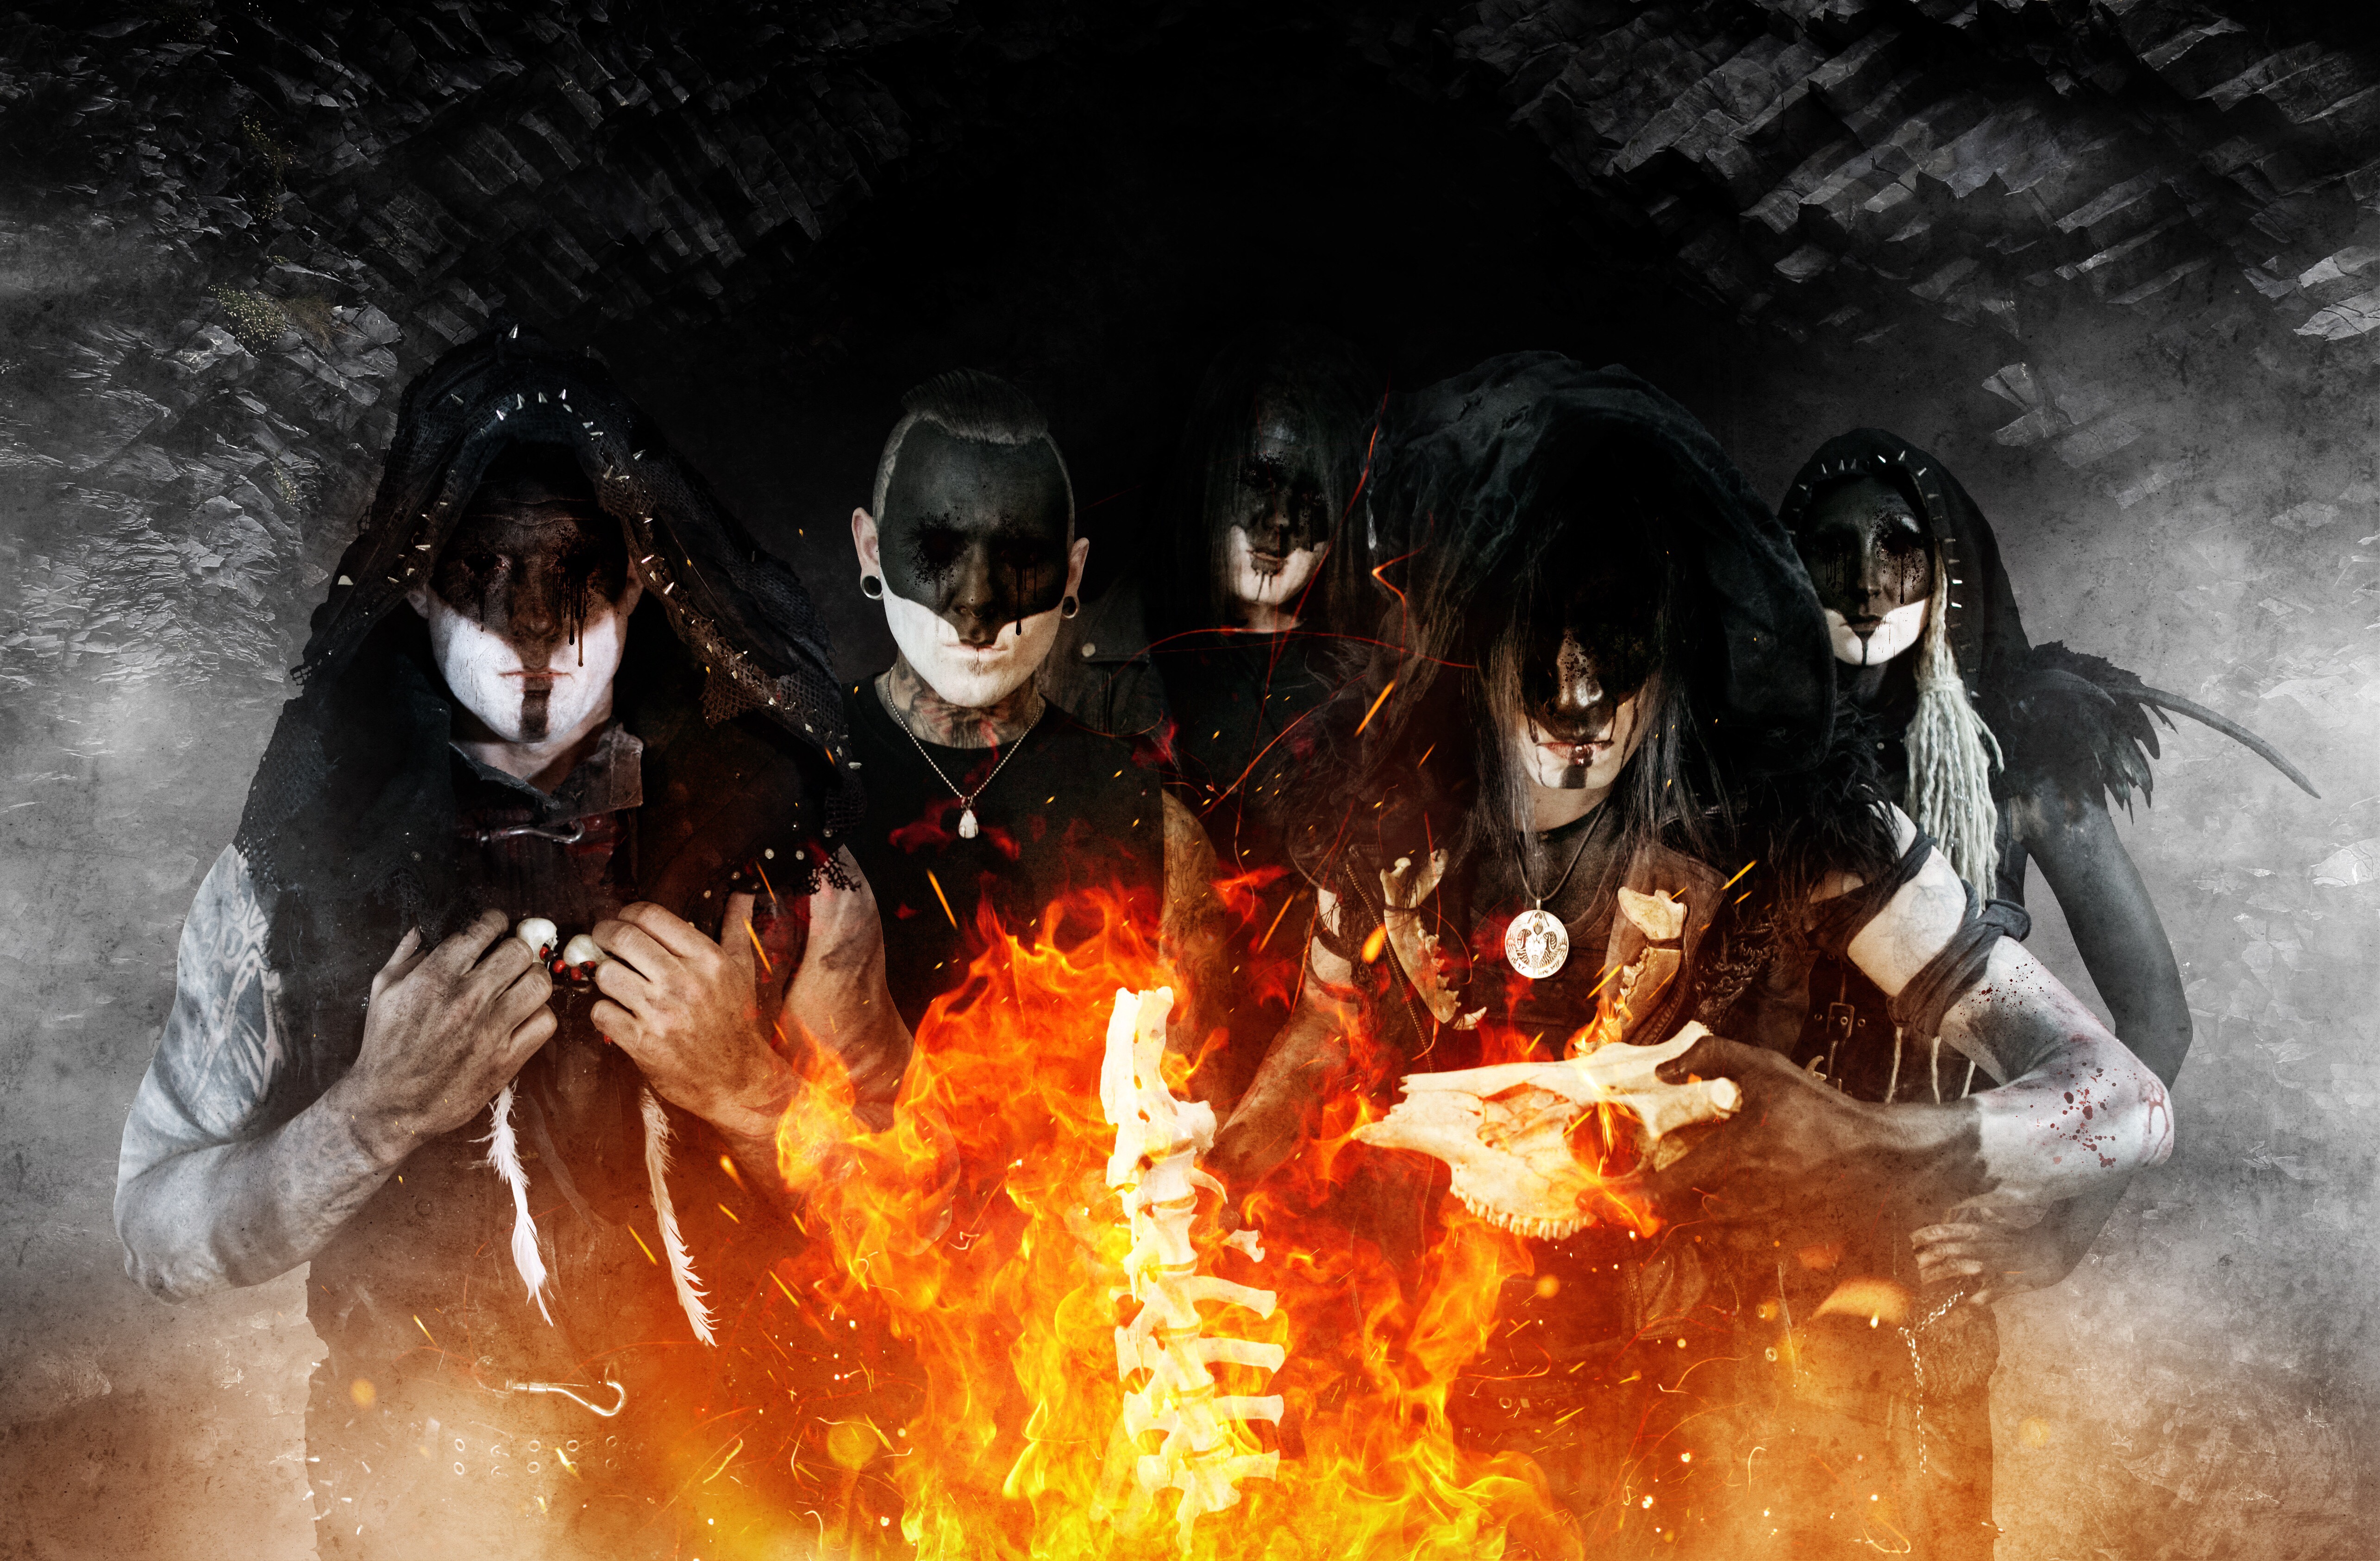 People 5140x3371 Dawn of Ashes band black metal industrial fire photo manipulation